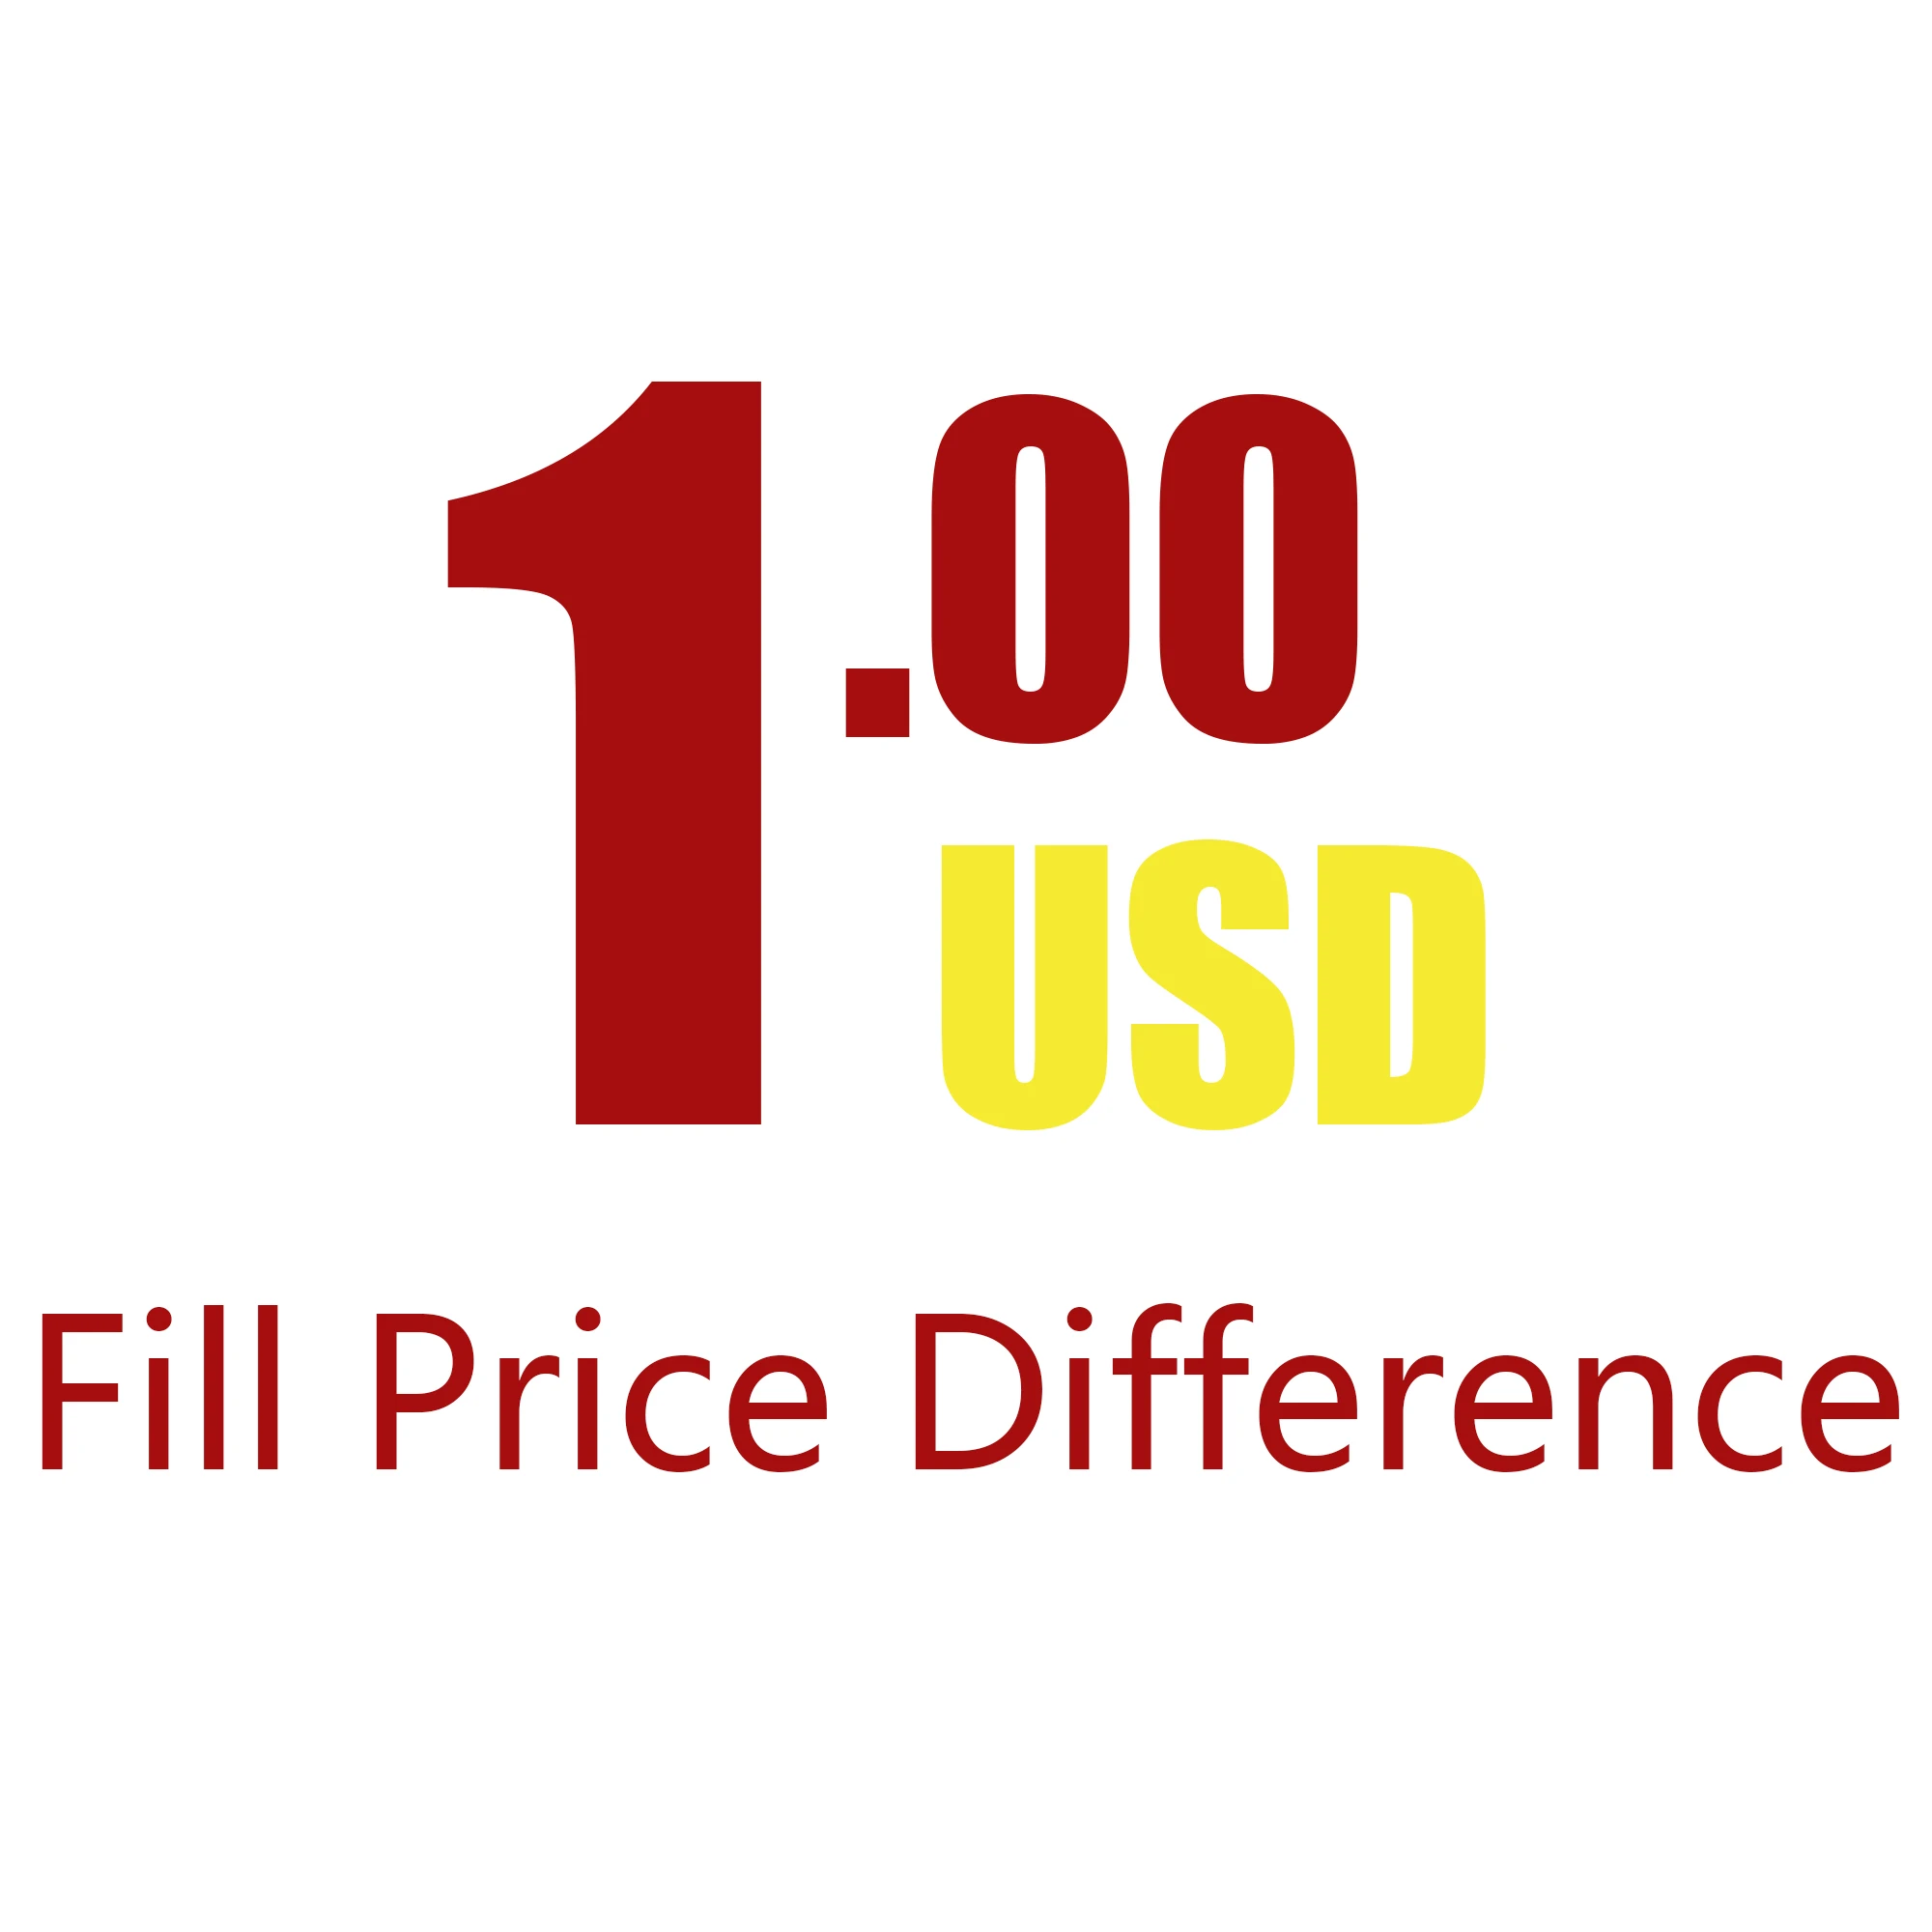 

USD$1 to Make Up the Difference, Supplementary to the Total Amount